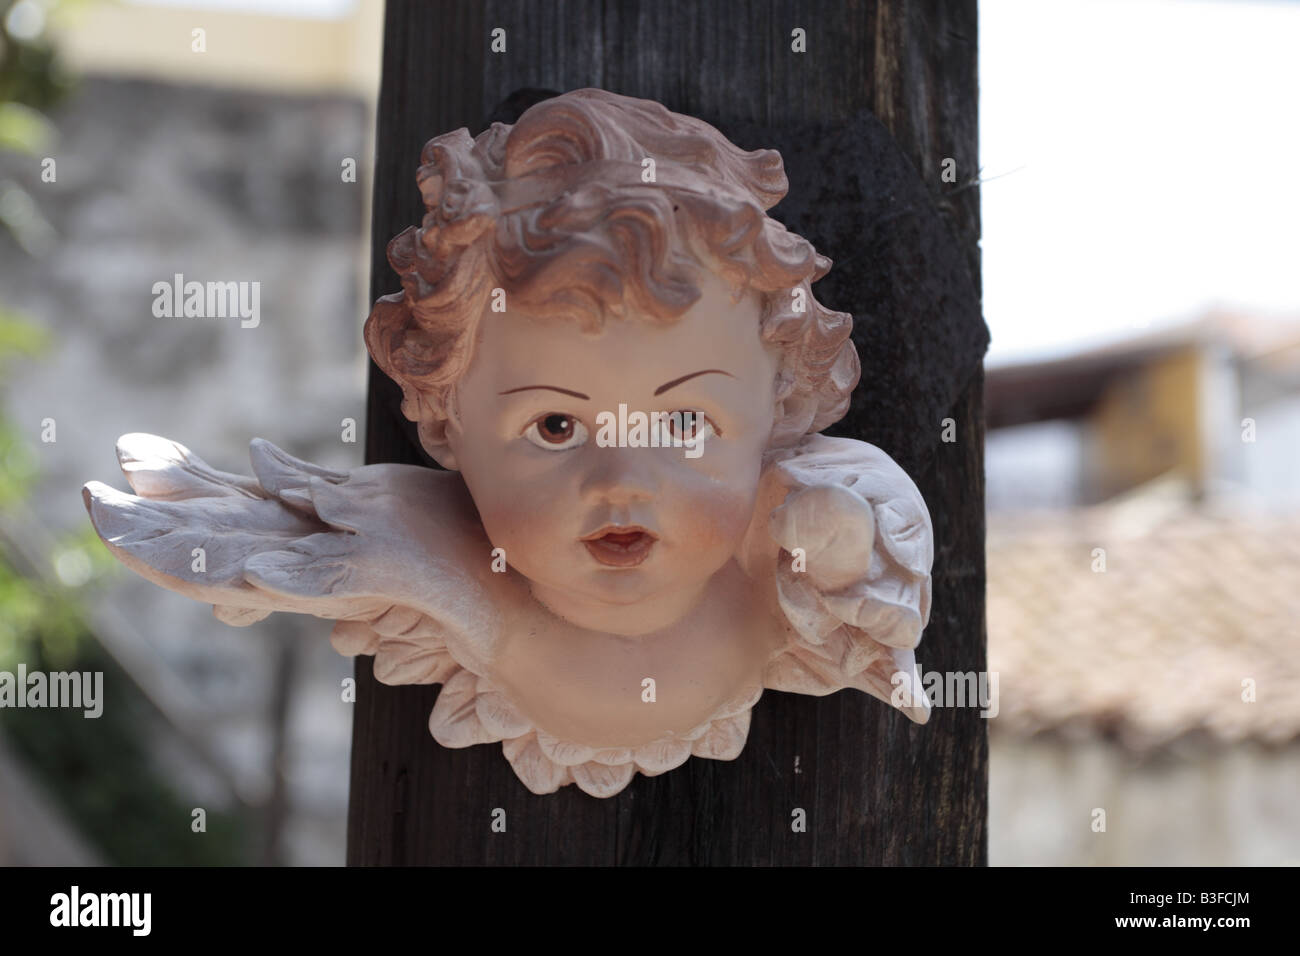 Plaster angel head hanging on a post Chirche Tenerife Canary Islands Spain Stock Photo